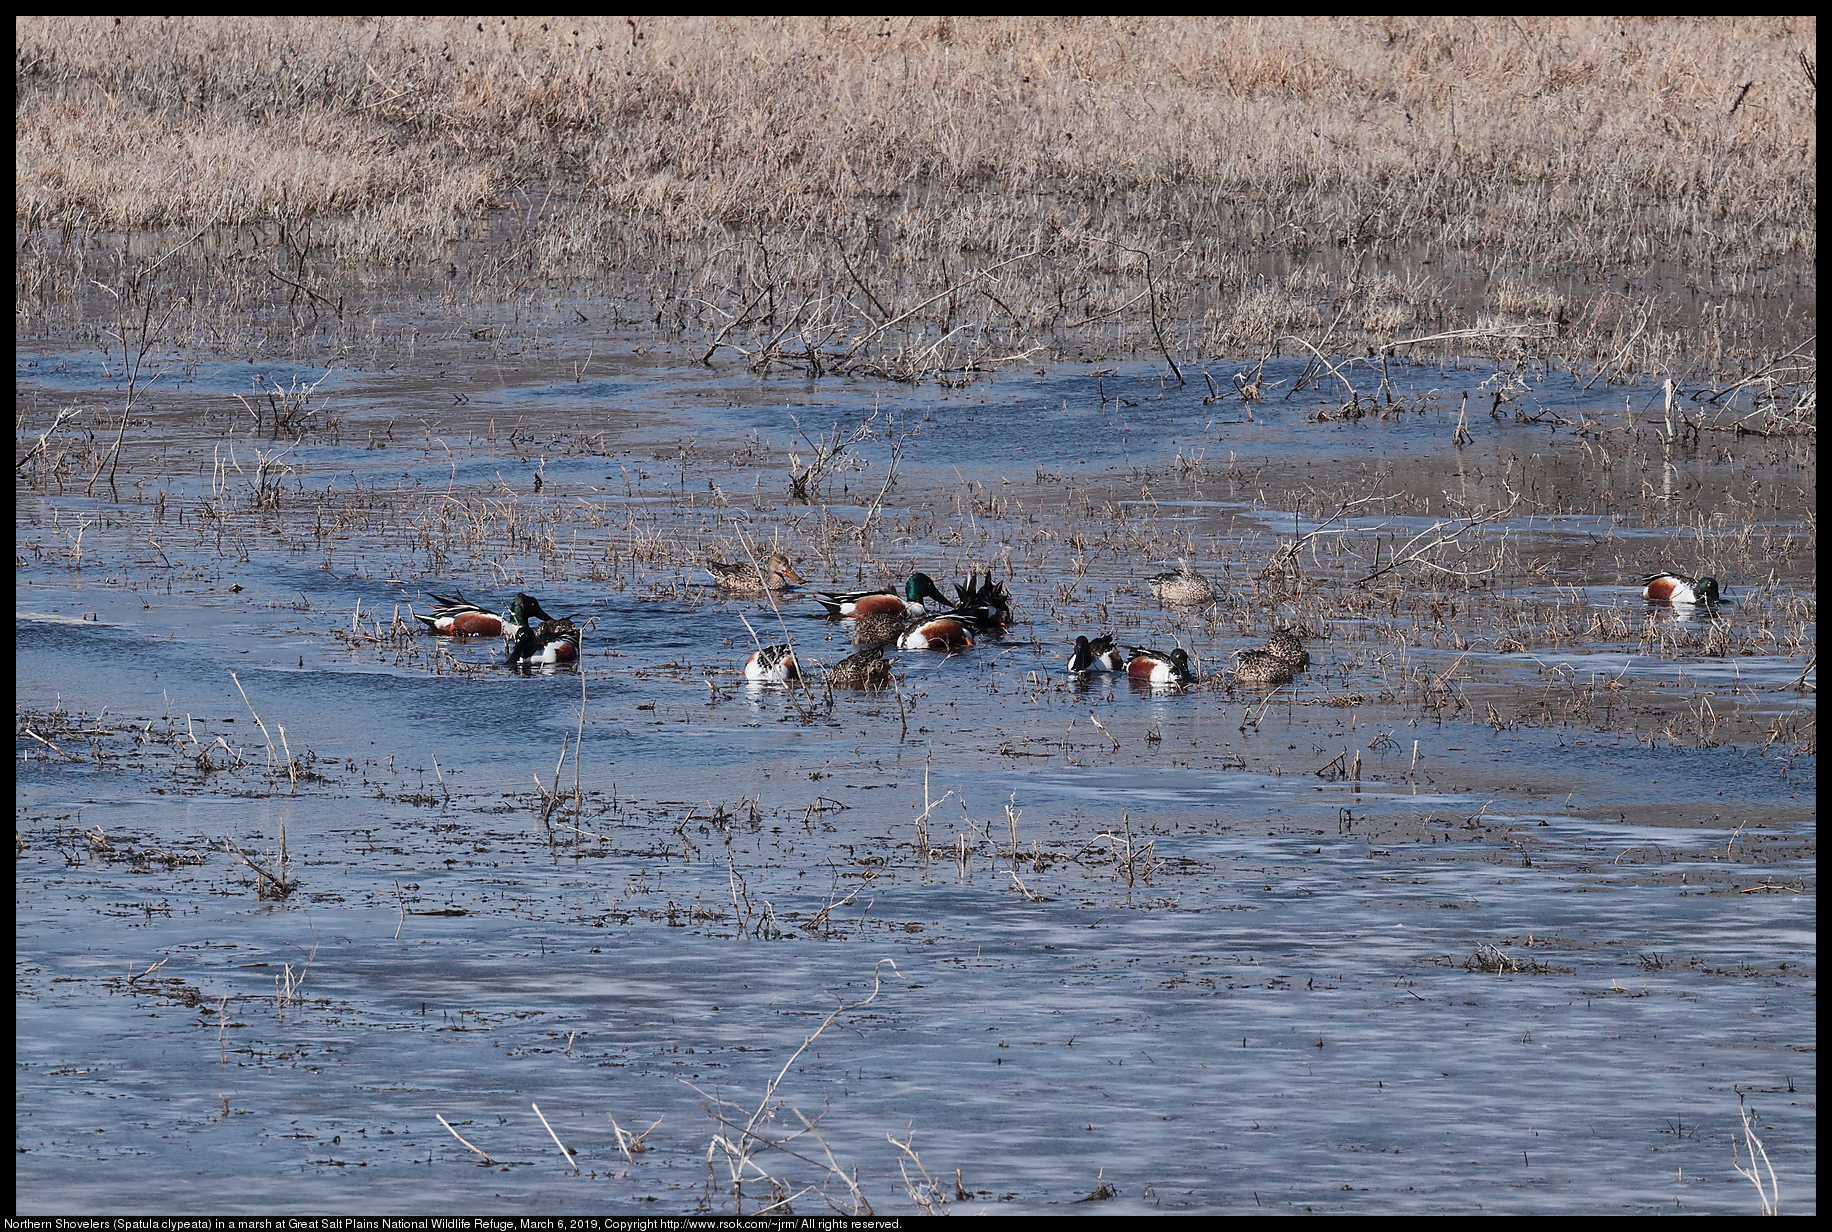 Northern Shovelers (Spatula clypeata) in a marsh at Great Salt Plains National Wildlife Refuge, March 6, 2019